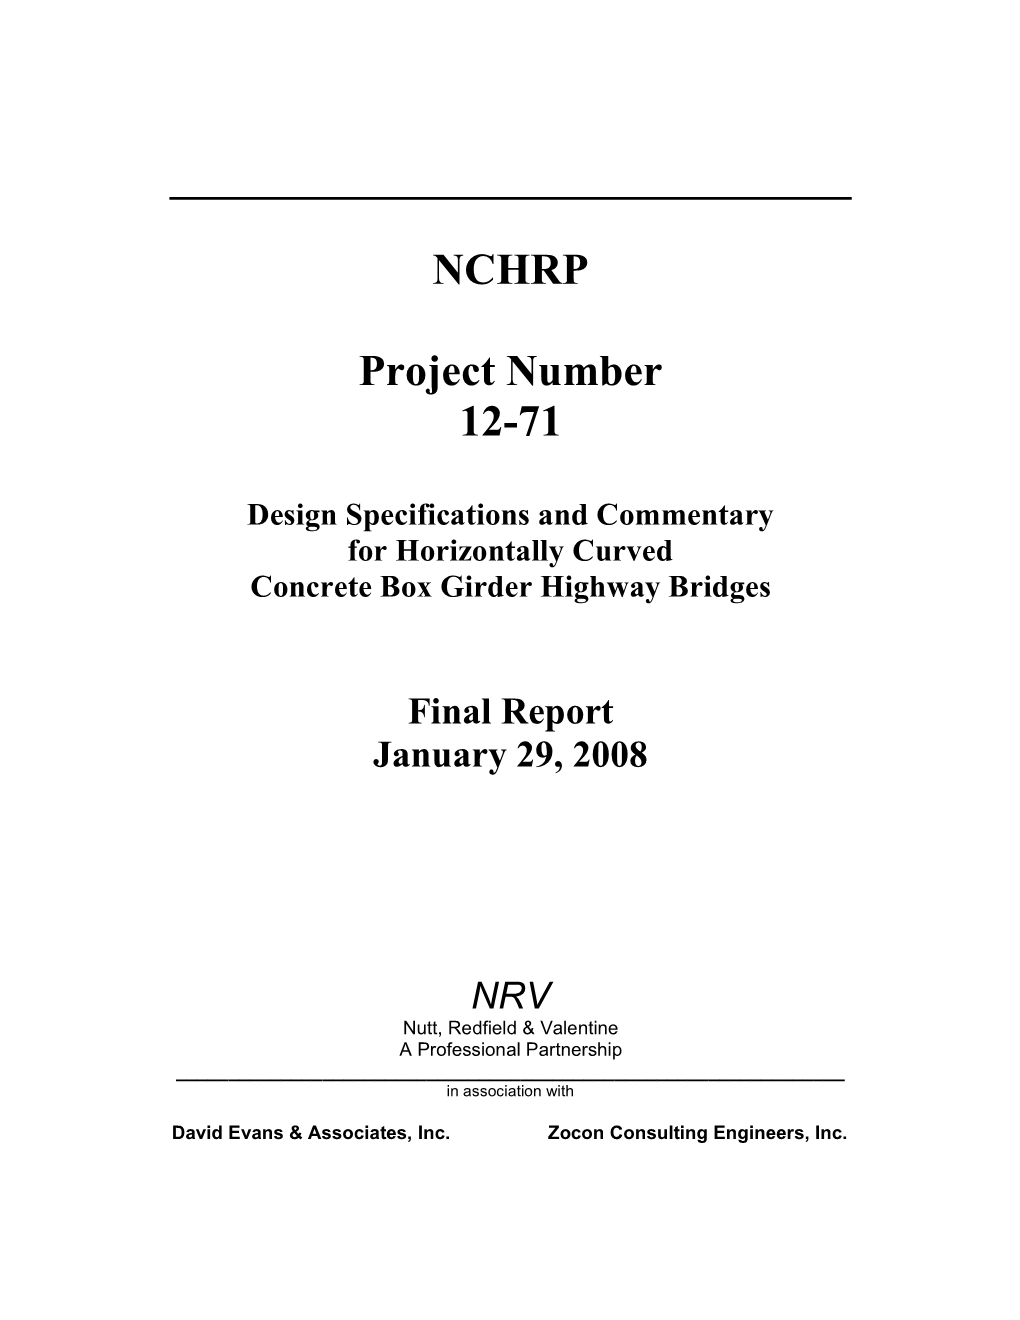 NCHRP Project Number 12-71